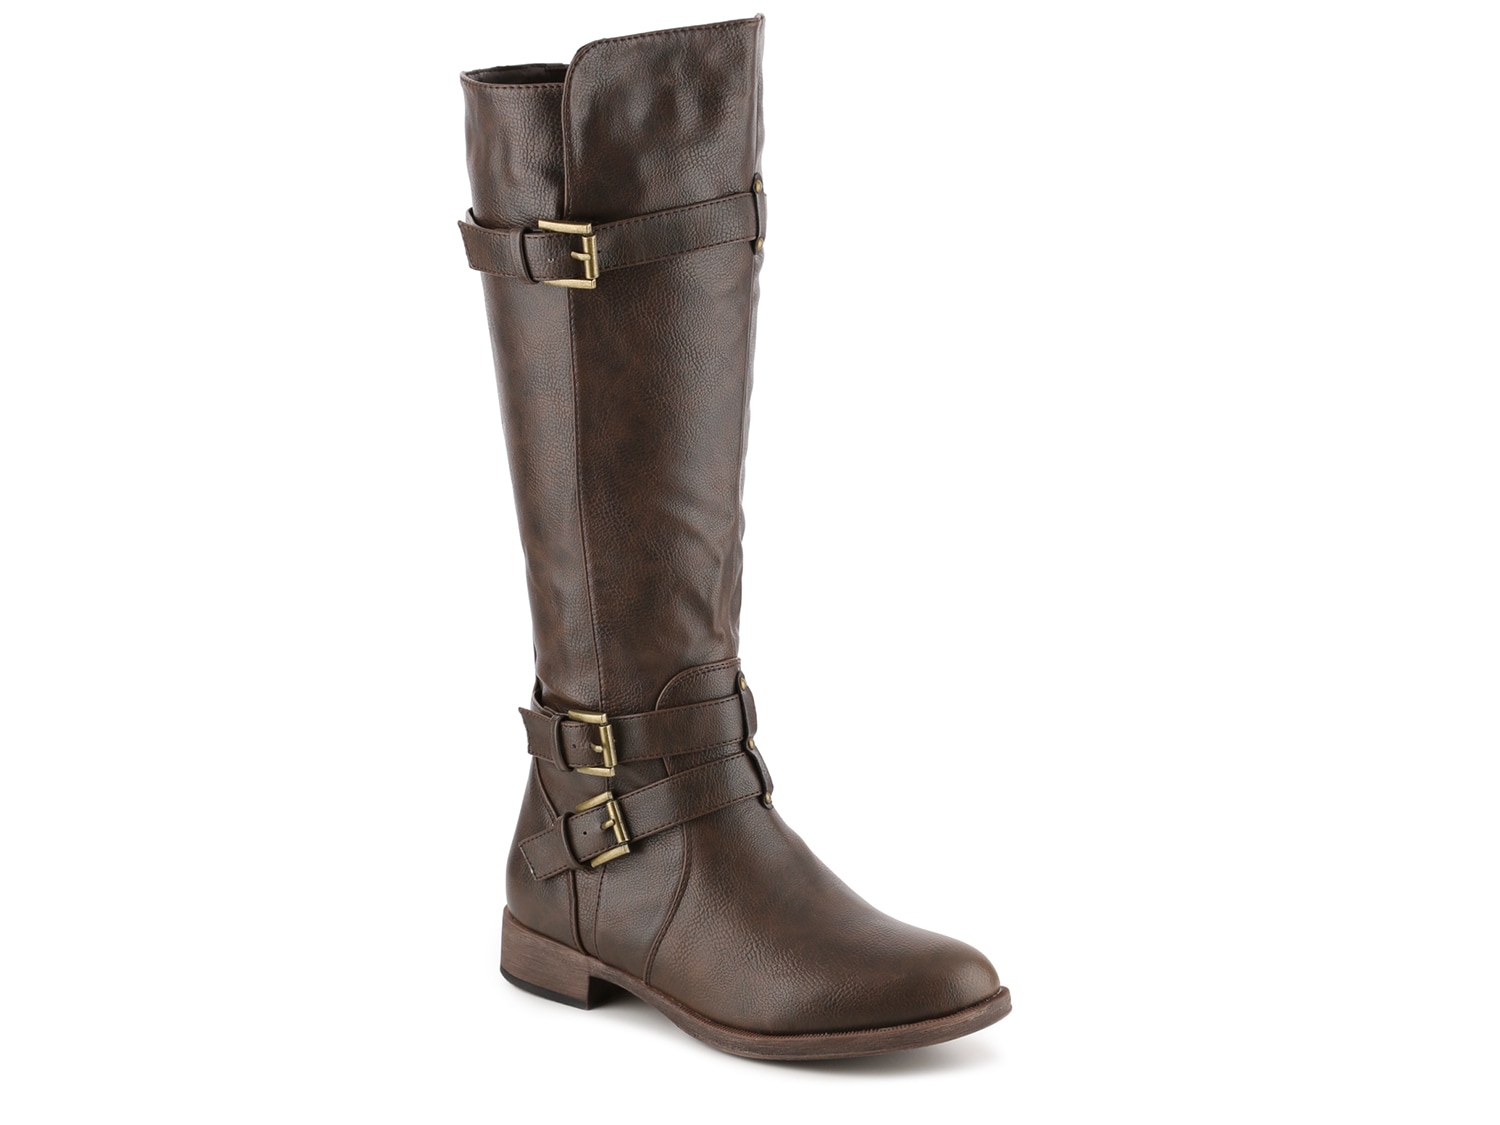 Journee Collection Bite Riding Boot | DSW